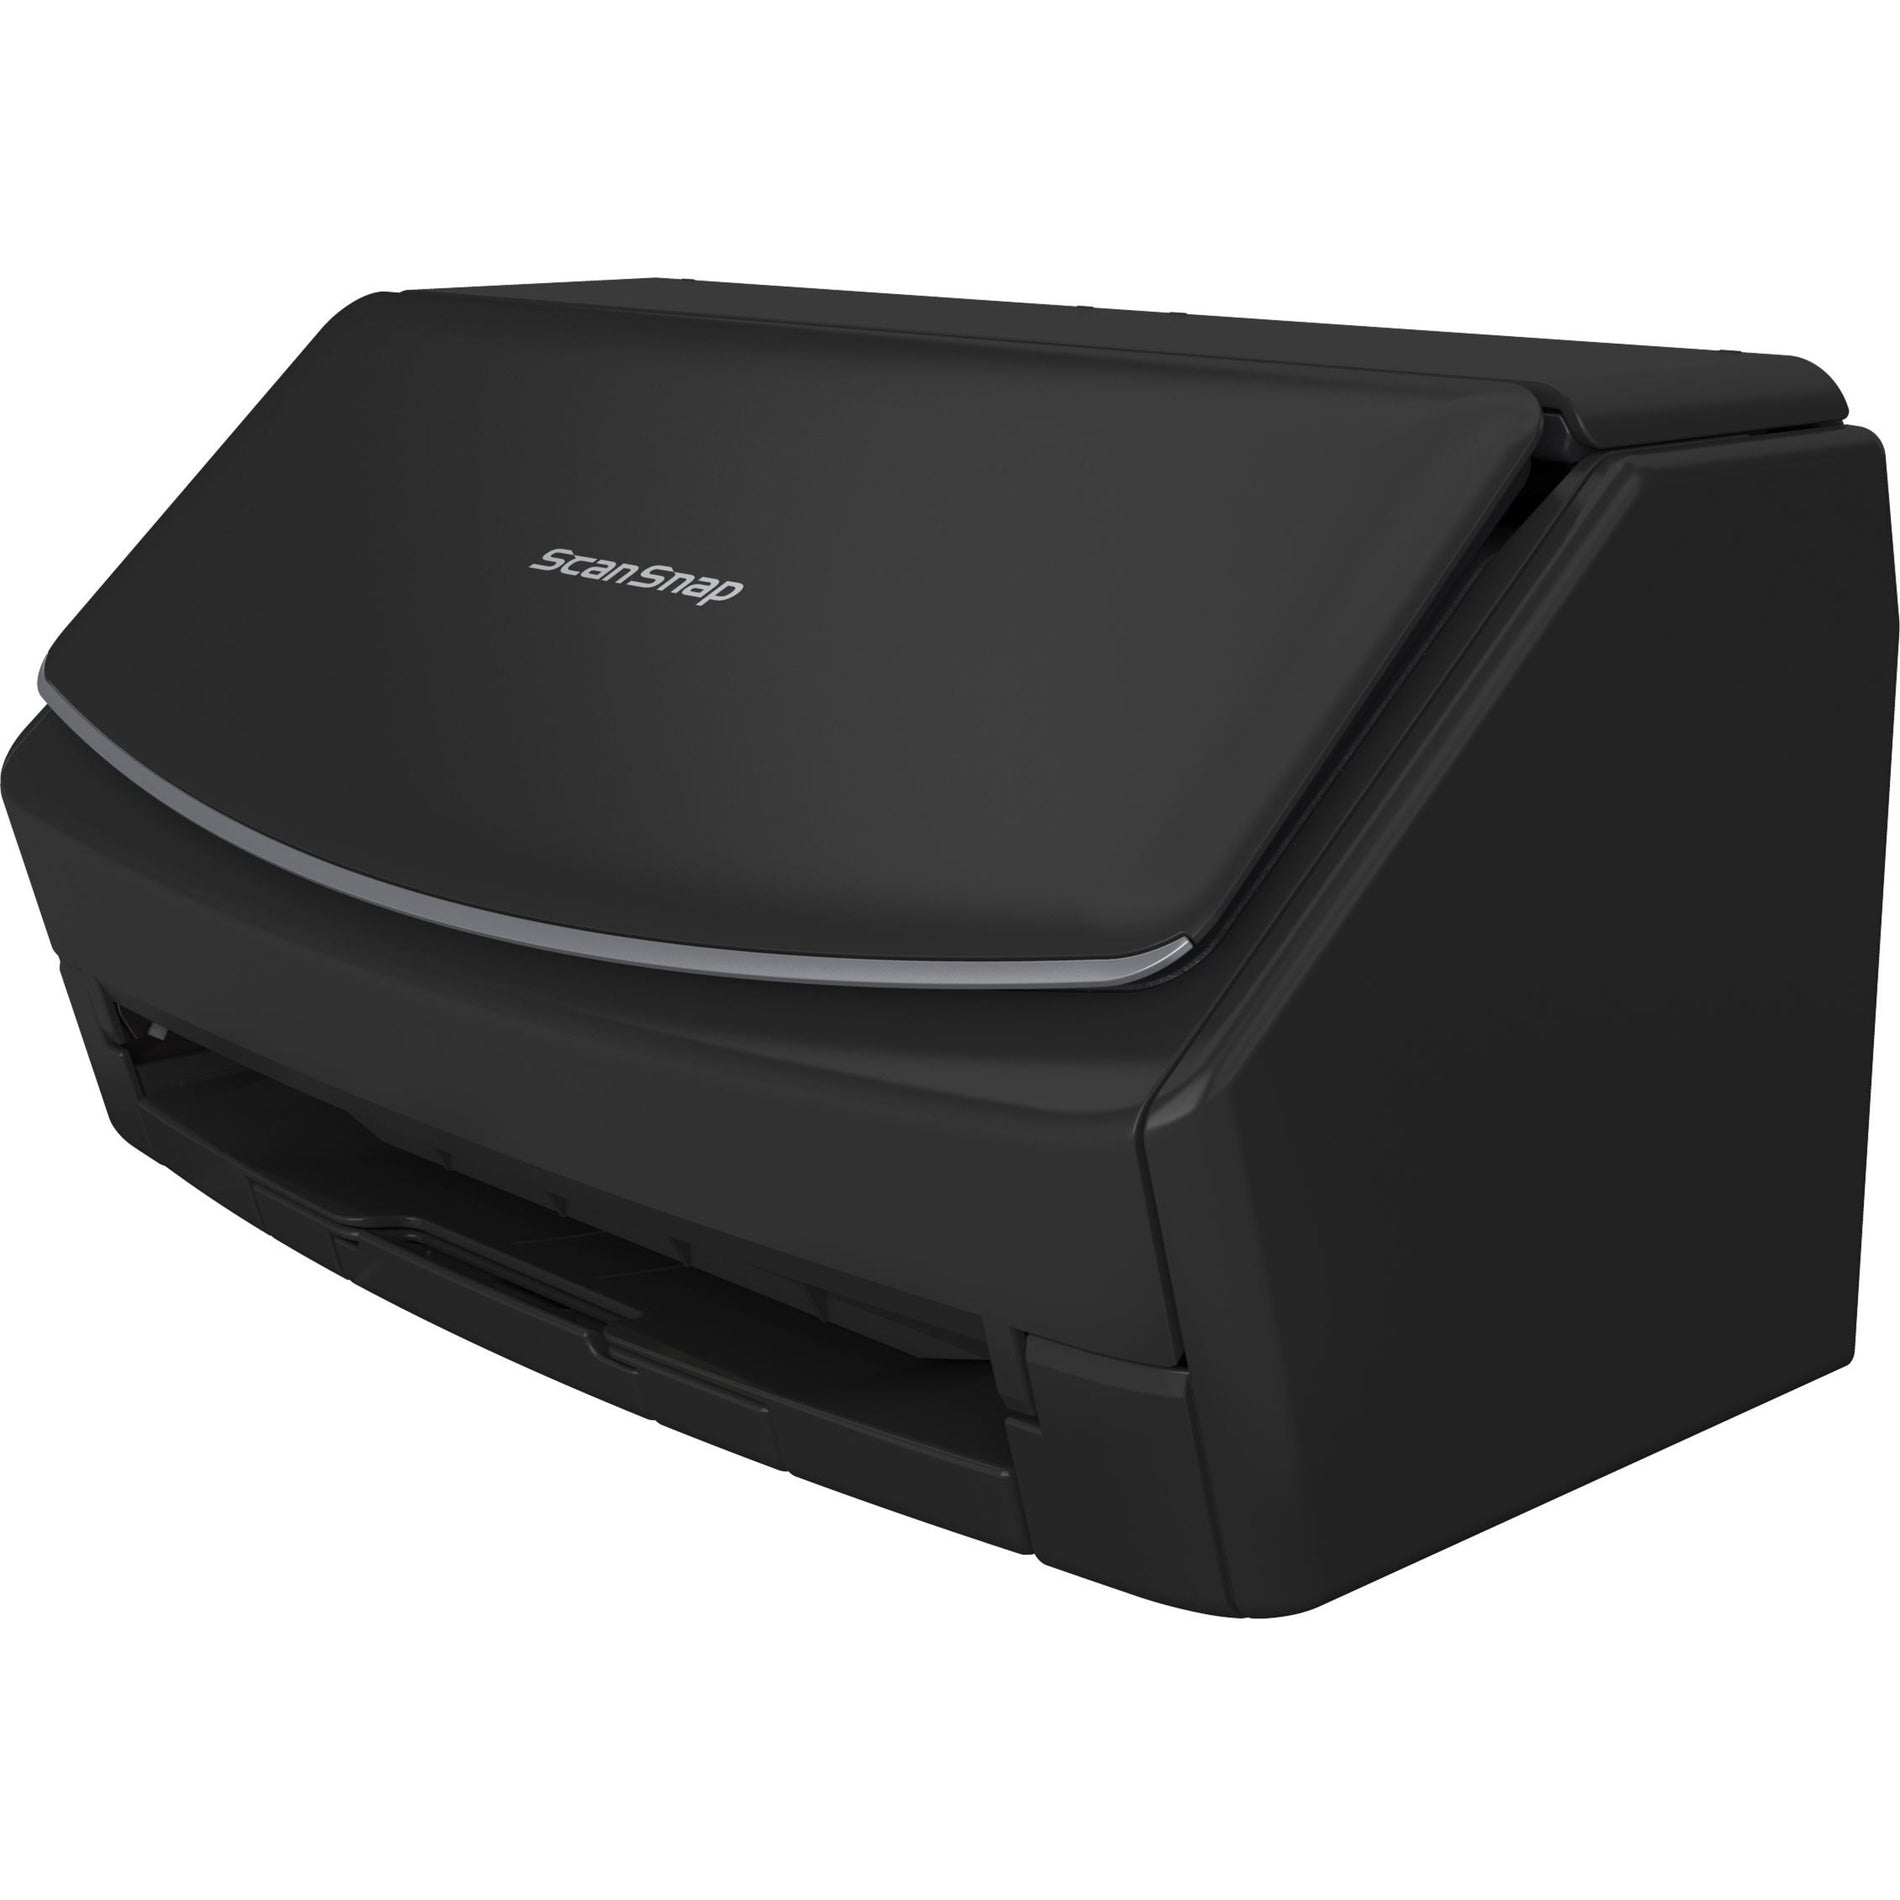 Fujitsu PA03770-B635 ScanSnap iX1600 Versatile Cloud Enabled Scanner, ADF Scanner, Monochrome/Color/Grayscale, 600 dpi Optical Resolution, 80 ipm/40 ppm Scan Speed